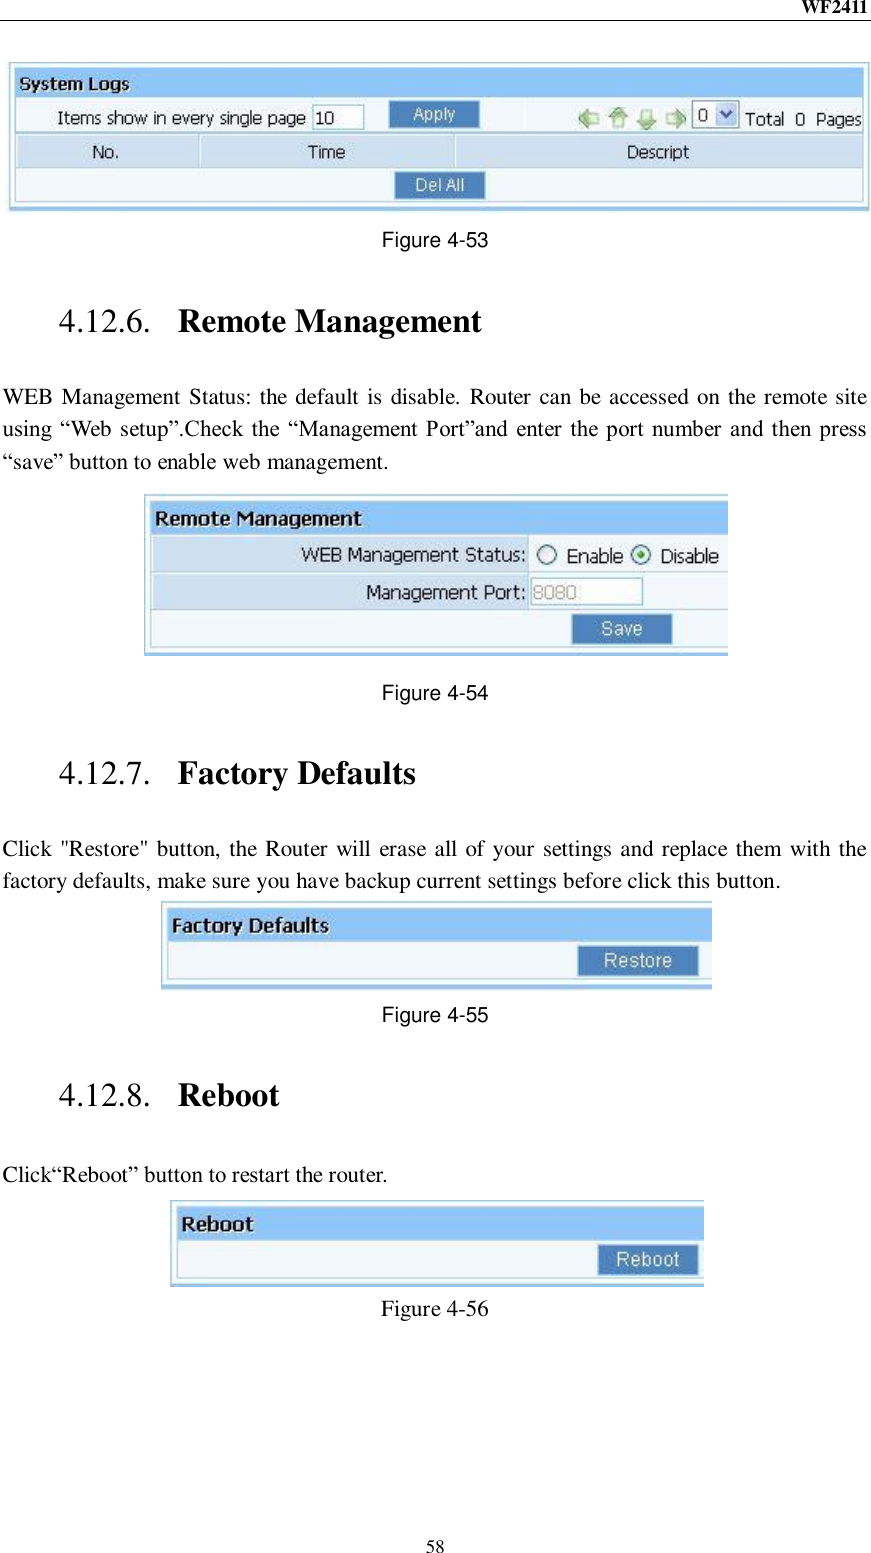 WF2411  58  Figure 4-53 4.12.6. Remote Management WEB Management Status: the default is disable. Router can be accessed on the remote site using “Web setup”.Check the  “Management Port”and enter  the port  number and  then press “save” button to enable web management.  Figure 4-54 4.12.7. Factory Defaults Click &quot;Restore&quot; button, the Router will erase all of your settings and replace them with the factory defaults, make sure you have backup current settings before click this button.  Figure 4-55 4.12.8. Reboot Click“Reboot” button to restart the router.  Figure 4-56 